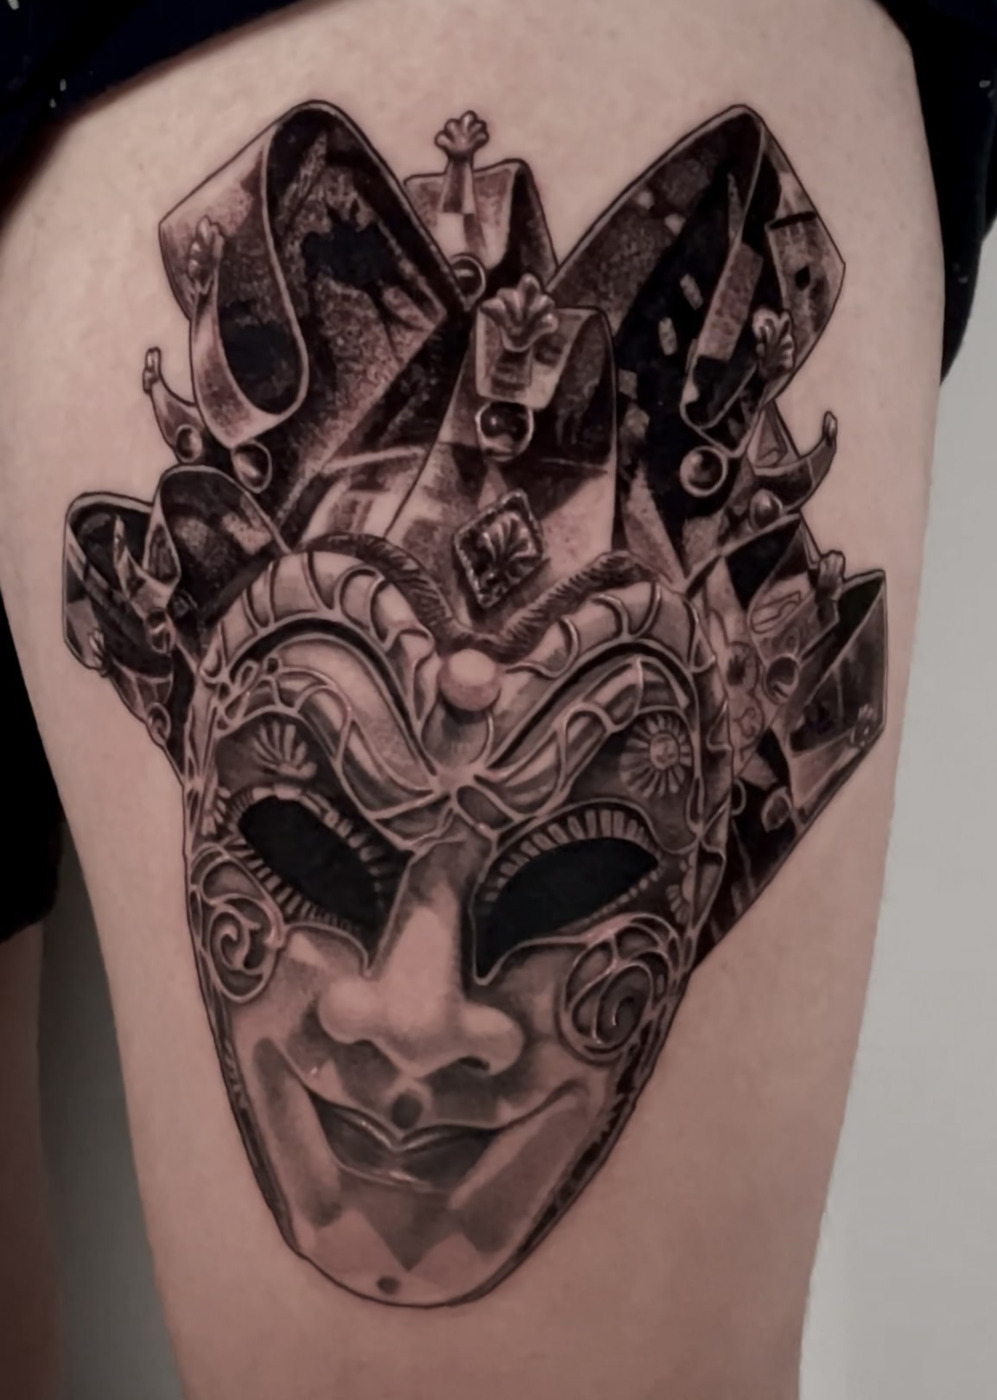 TatMasters - Read everything about Black & Grey tattoos